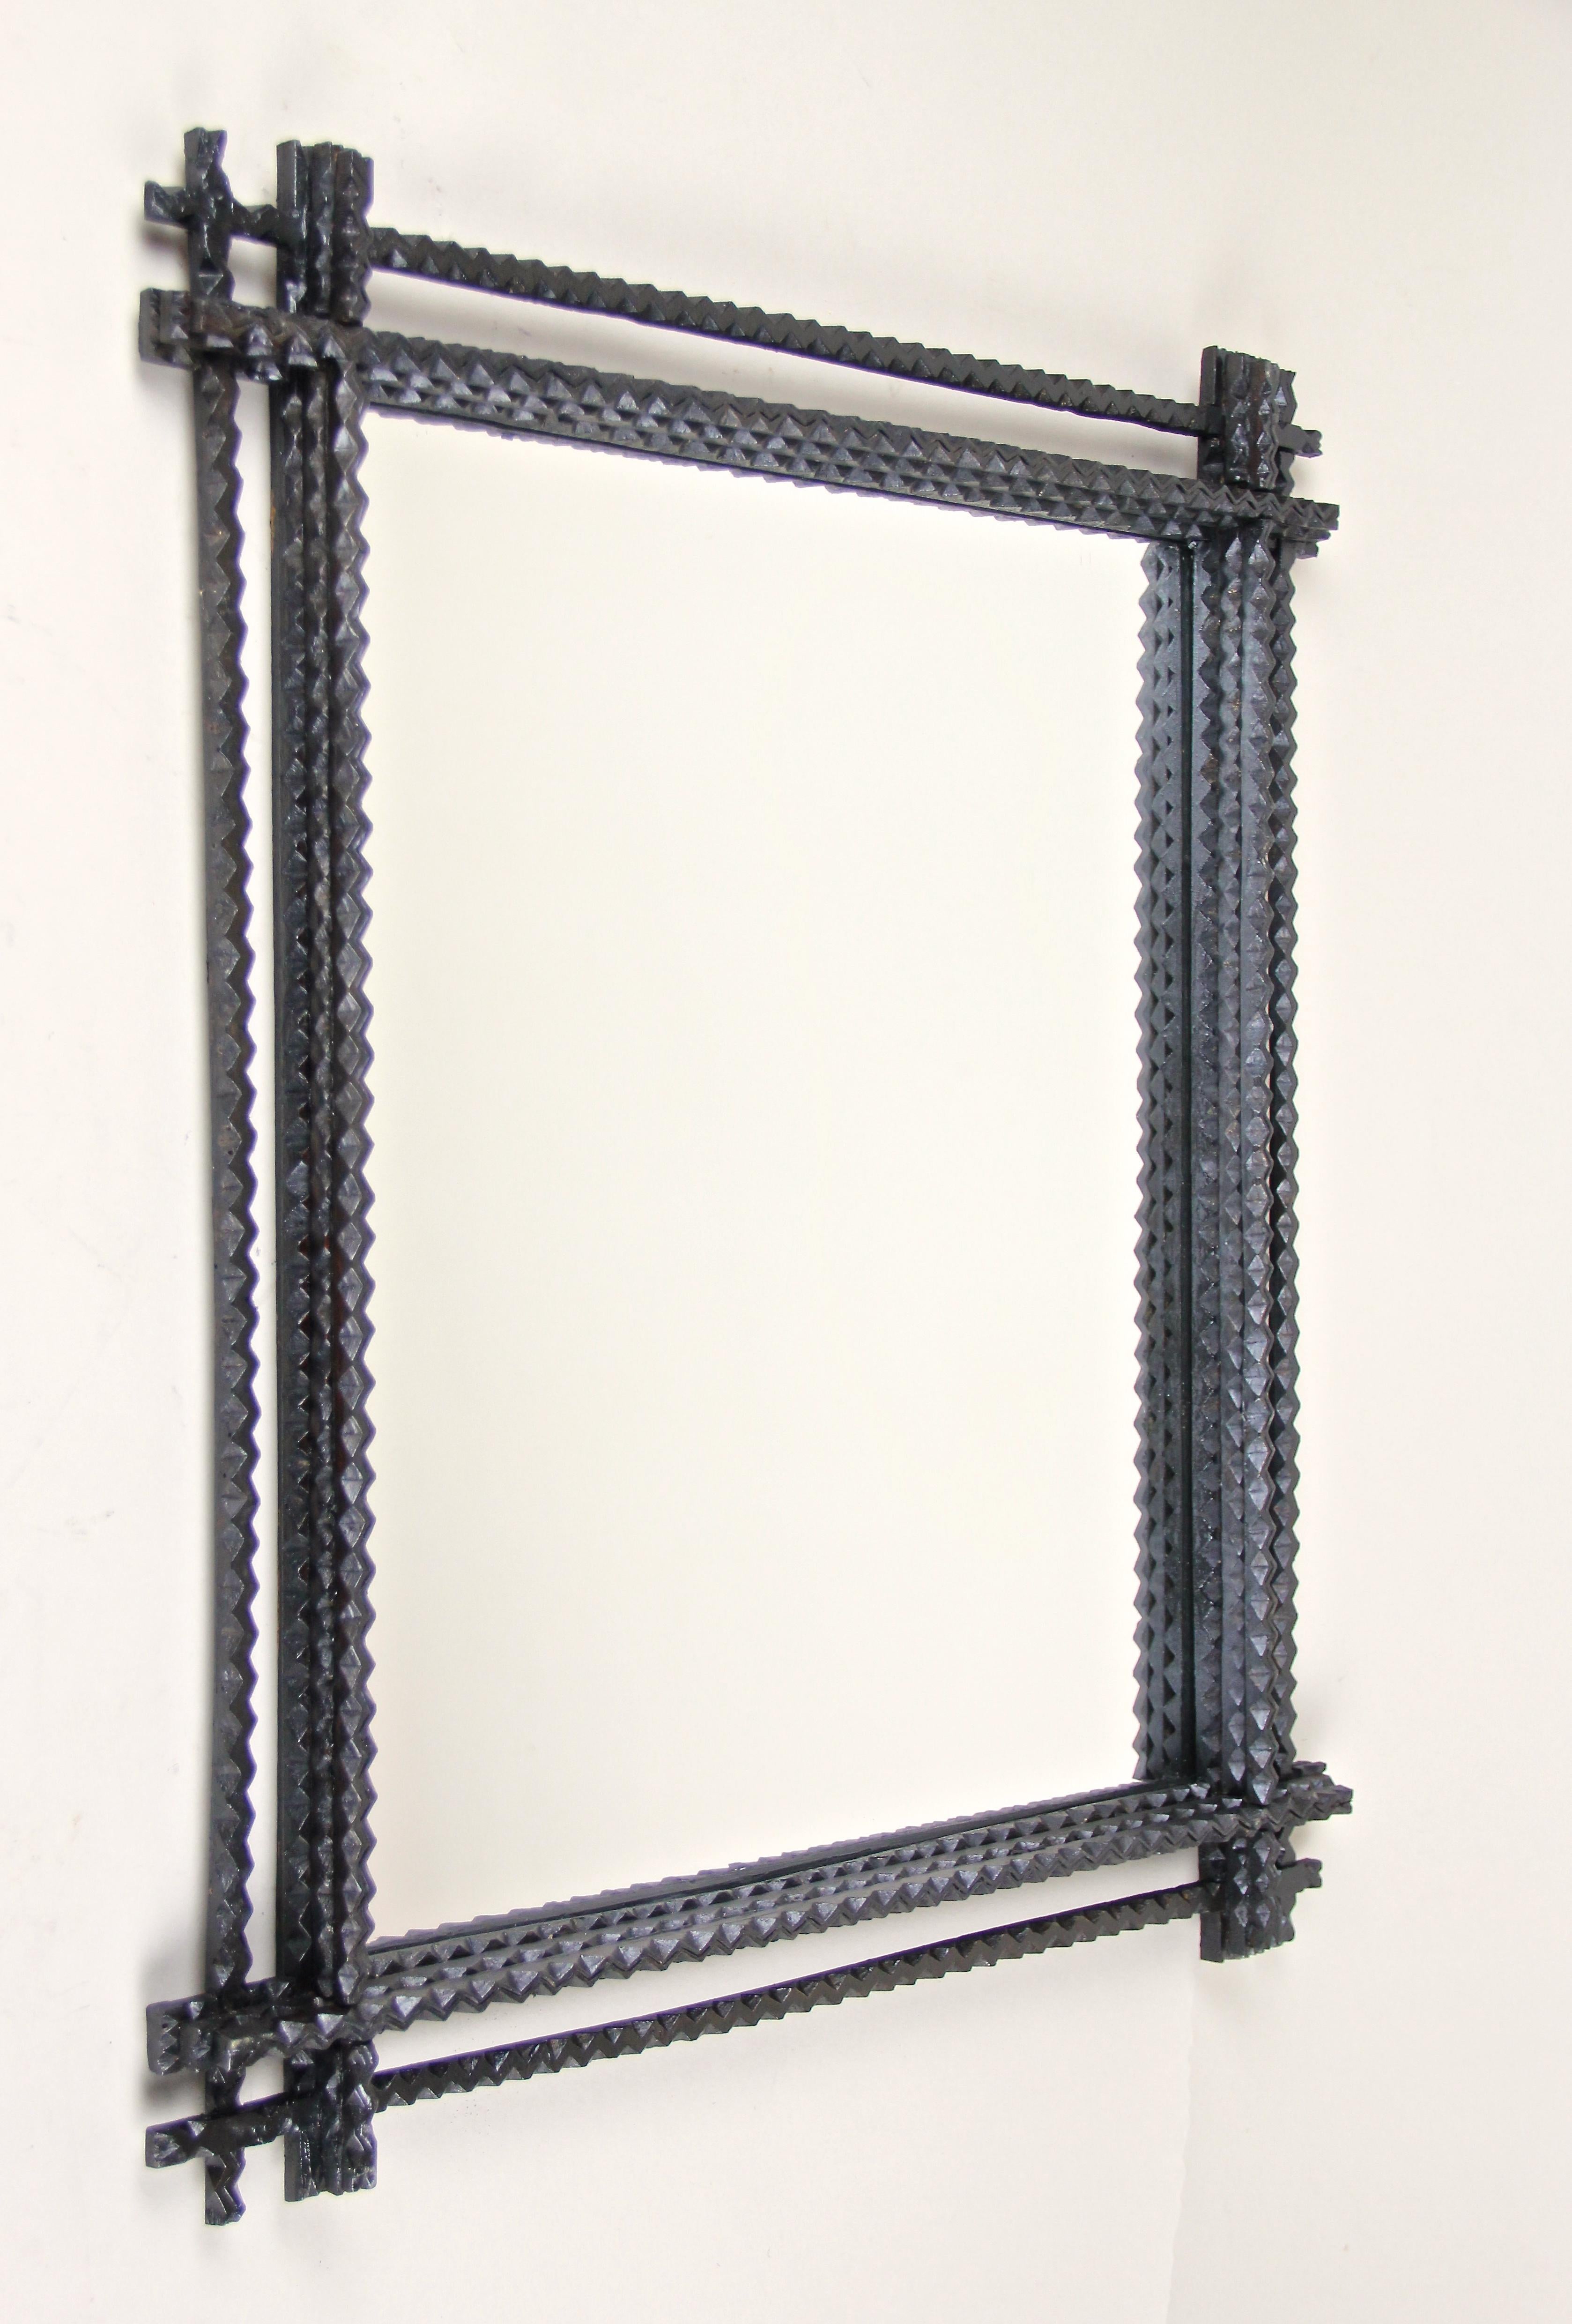 Gorgeous hand carved tramp art wall mirror from Austria, circa 1880. This rustic wall mirror has been effort fully hand carved out of basswood and comes with a dark brown almost black surface. Framed by additional slim bars on the outside, the